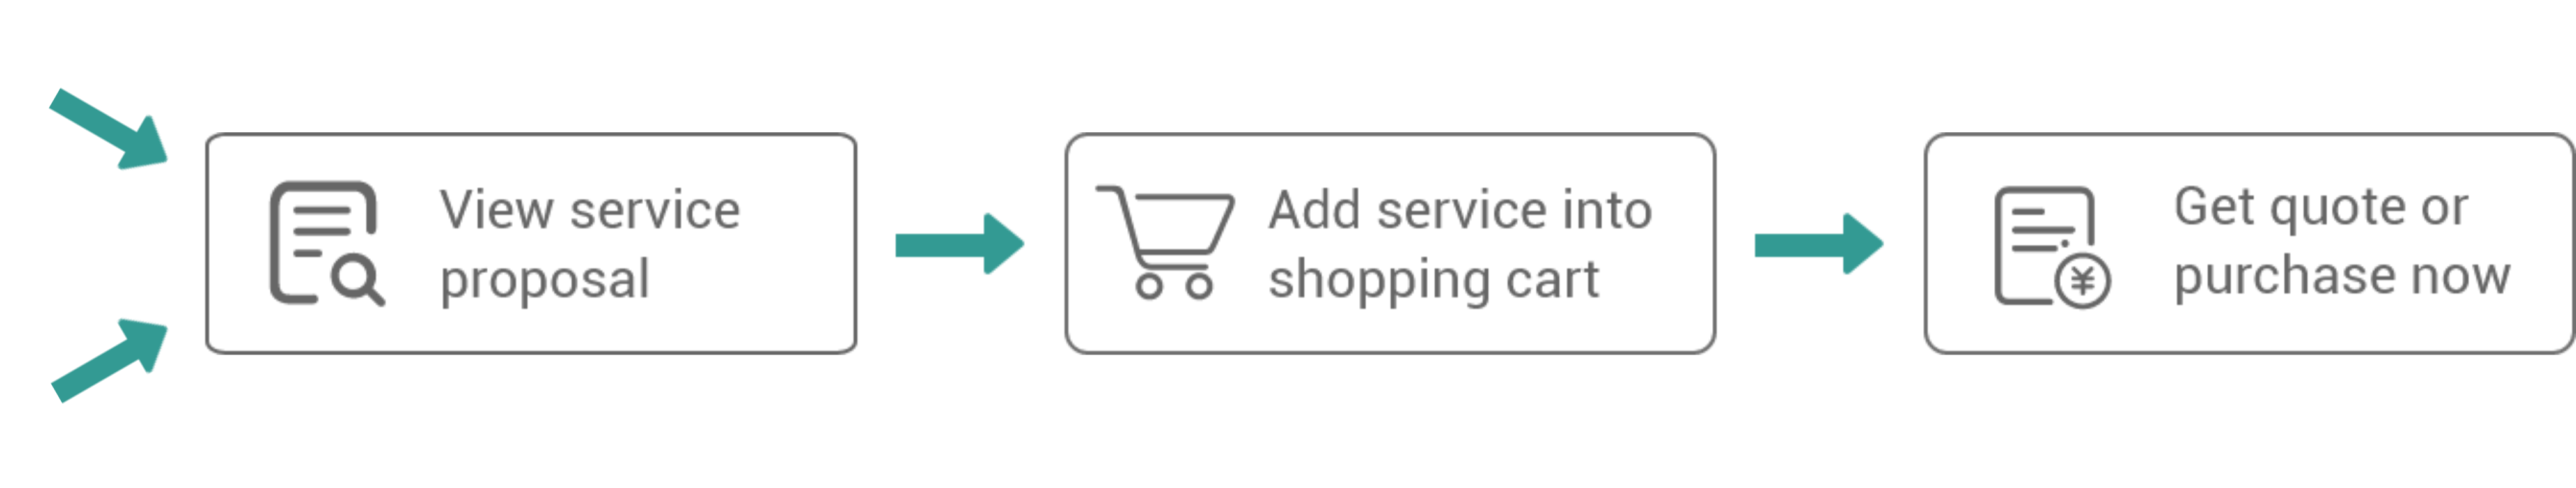 View service proposal > Add service into shopping cart > Get quote or purchase now.